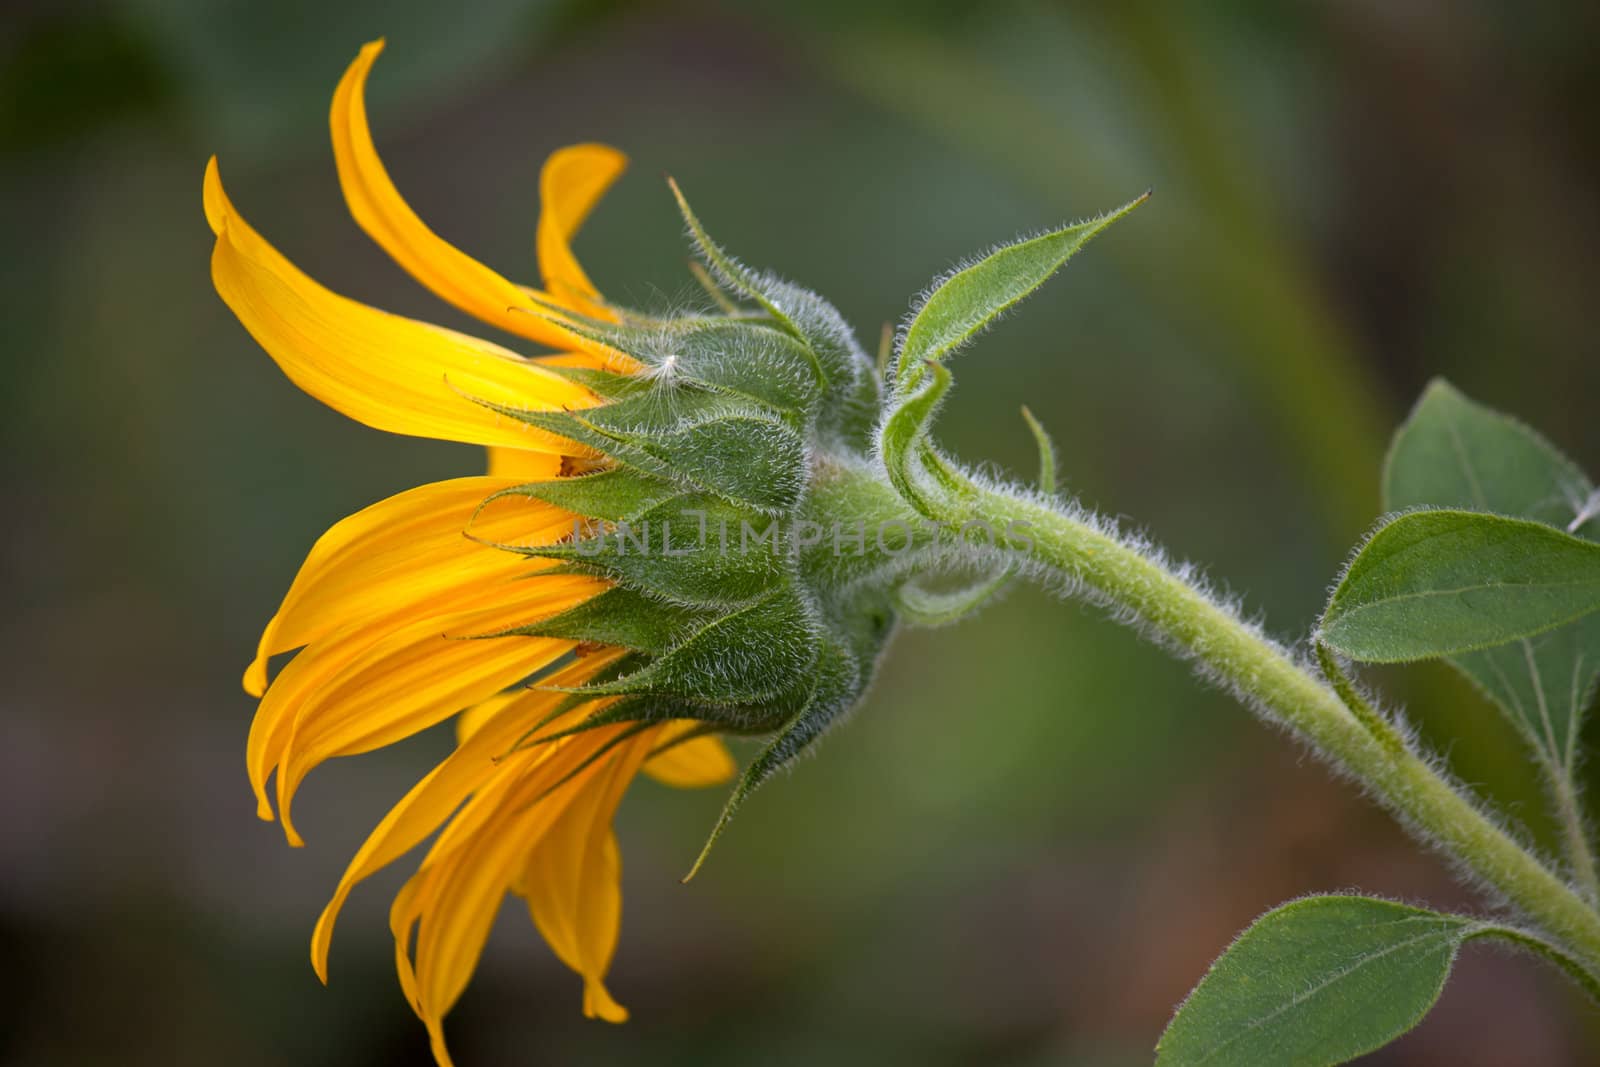 Flower of sunflower  close-up from  side against  plant.